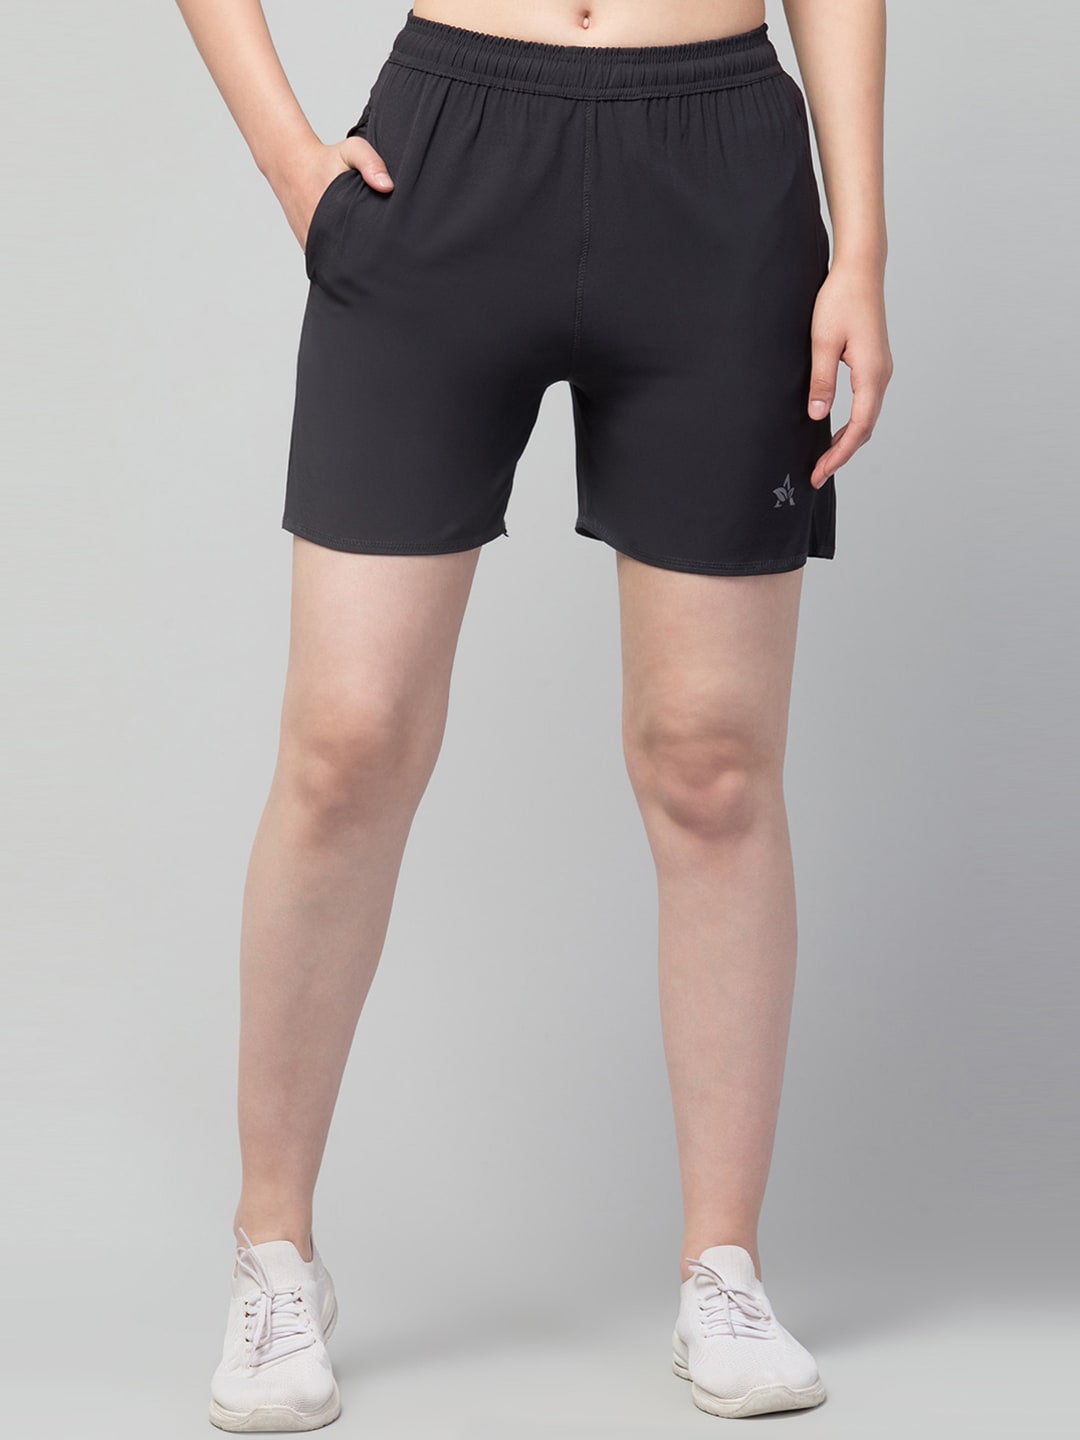 Apraa & Parma Women Outdoor Sports Shorts with e-Dry Technology Price in India